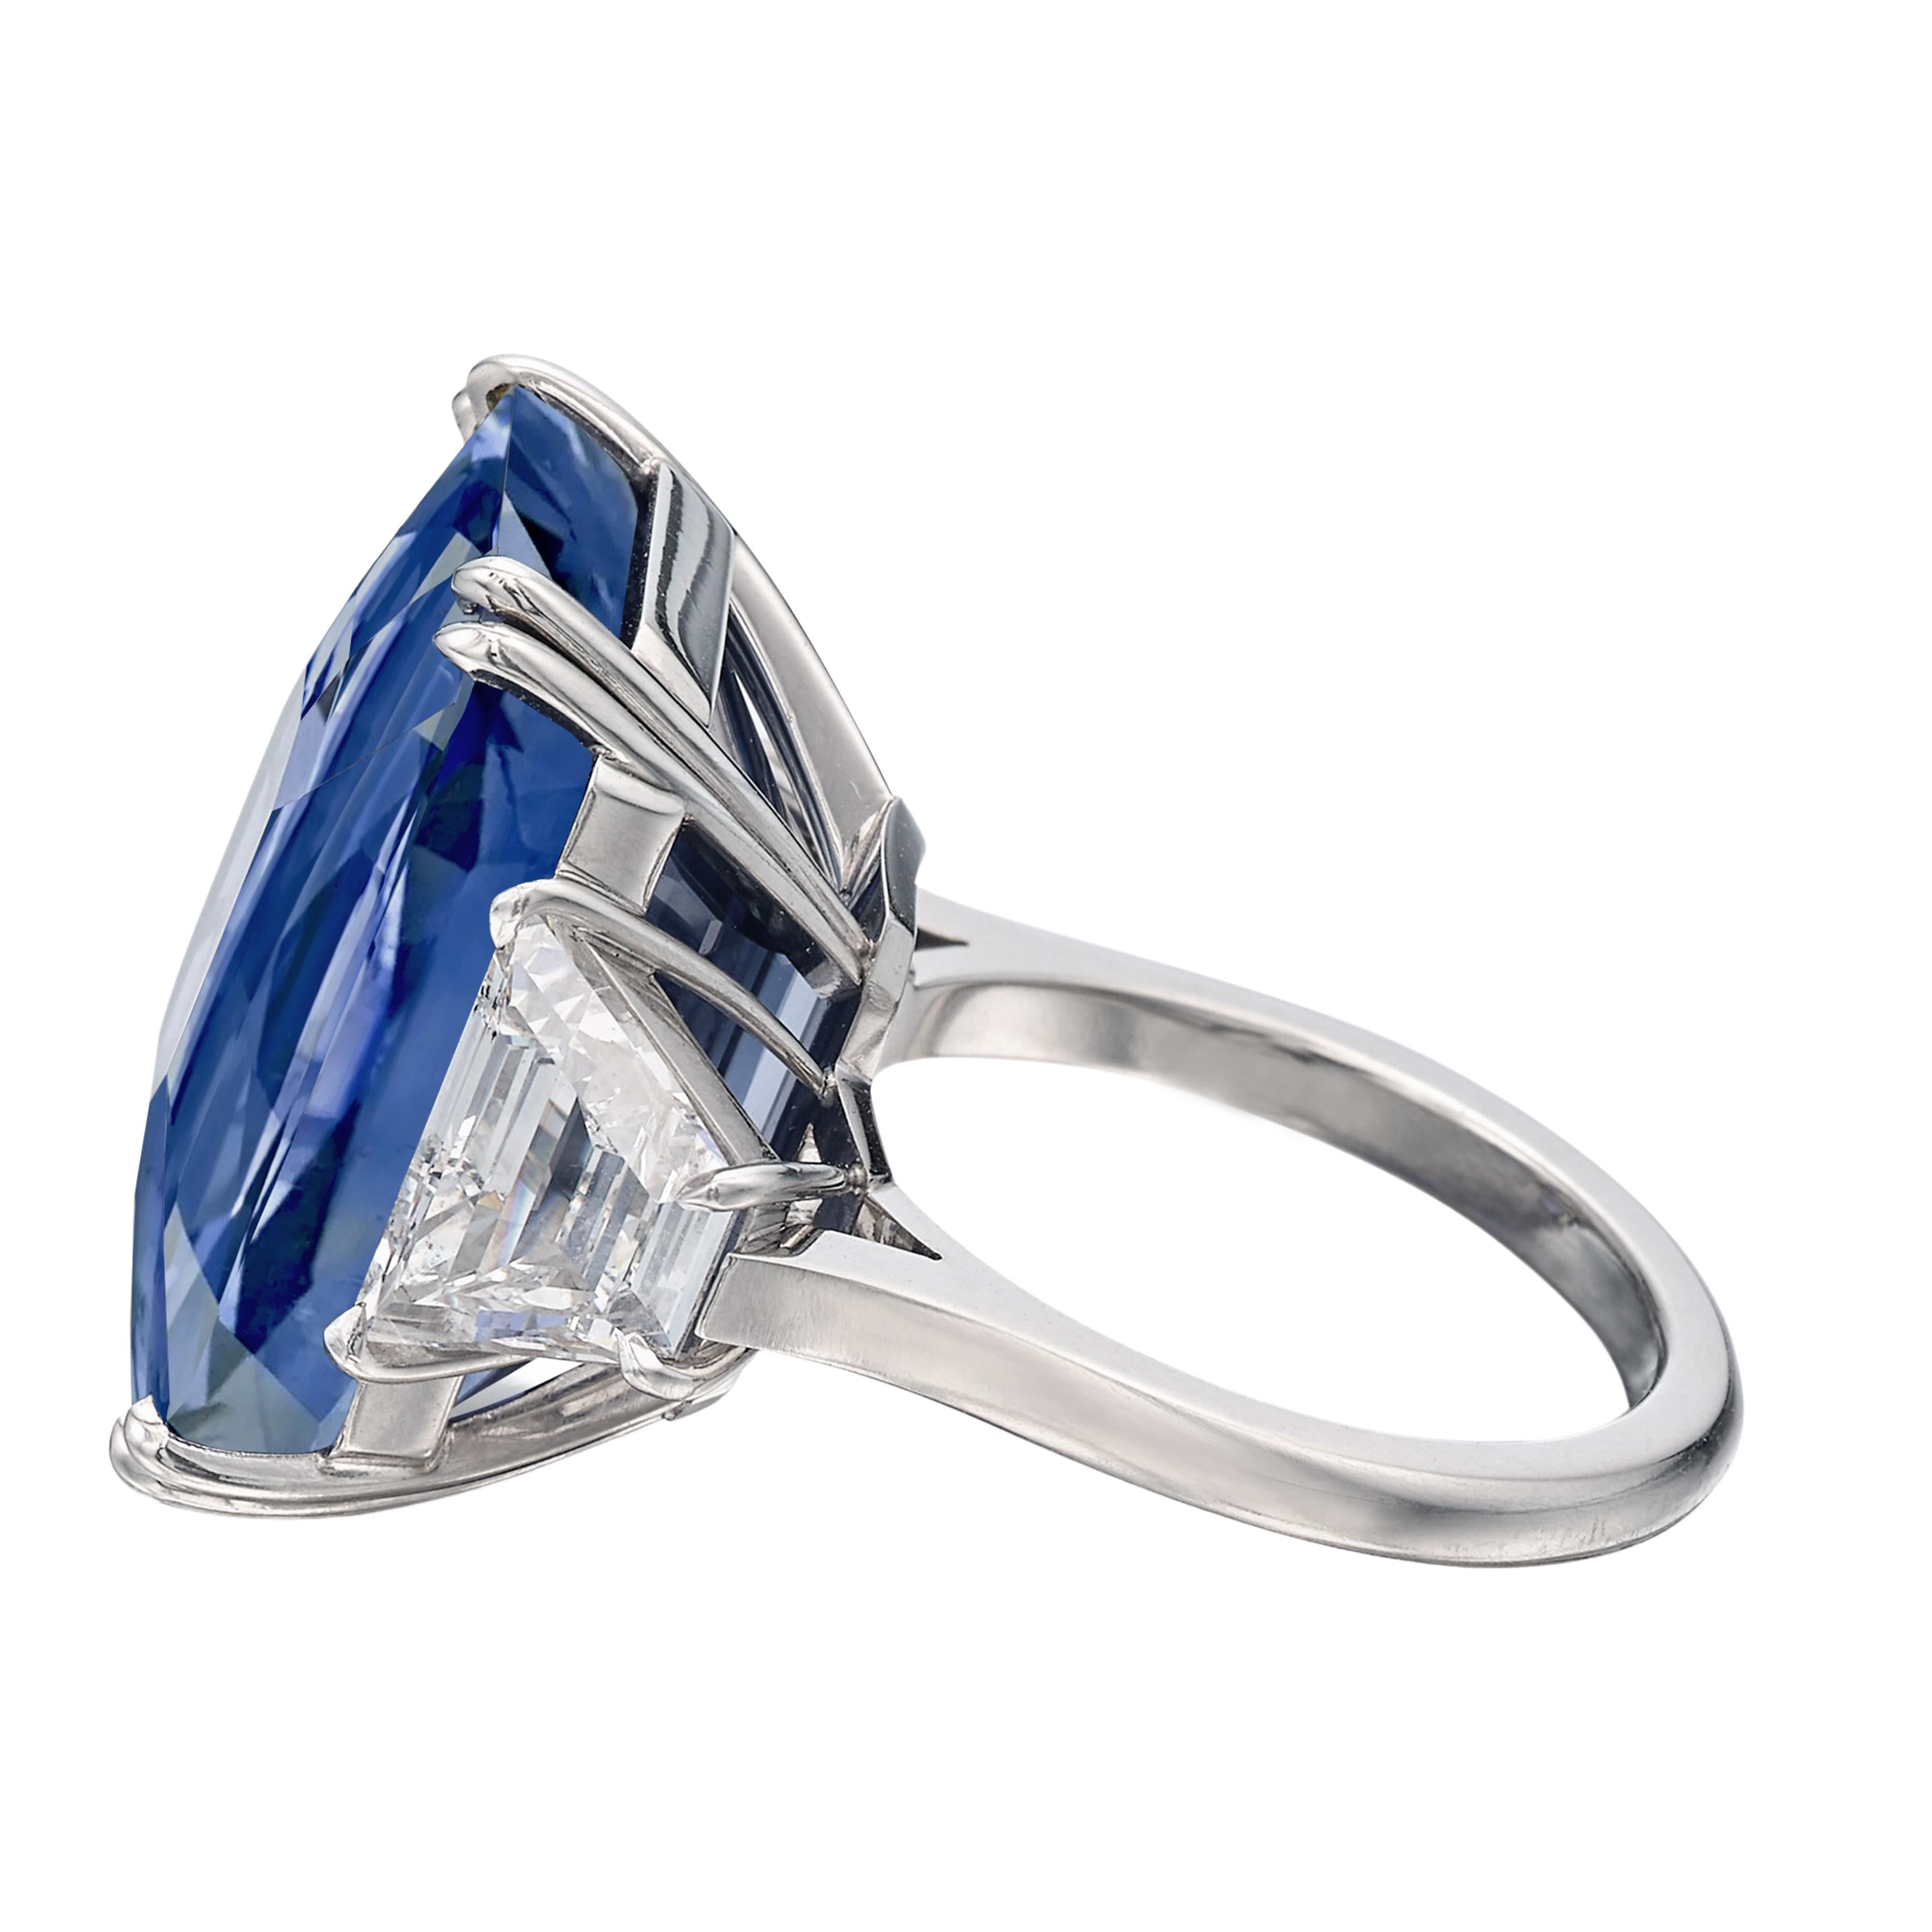 Created by Antinori di Sanpietro this ring is an excellent investment! Showcasing an Emerald Cut Ceylon Sapphire weighing 8 carats, and certified by Gubelin and GIA as an untreated, UNHEATED Sri Lankan Ceylon Sapphire. You will notice very few